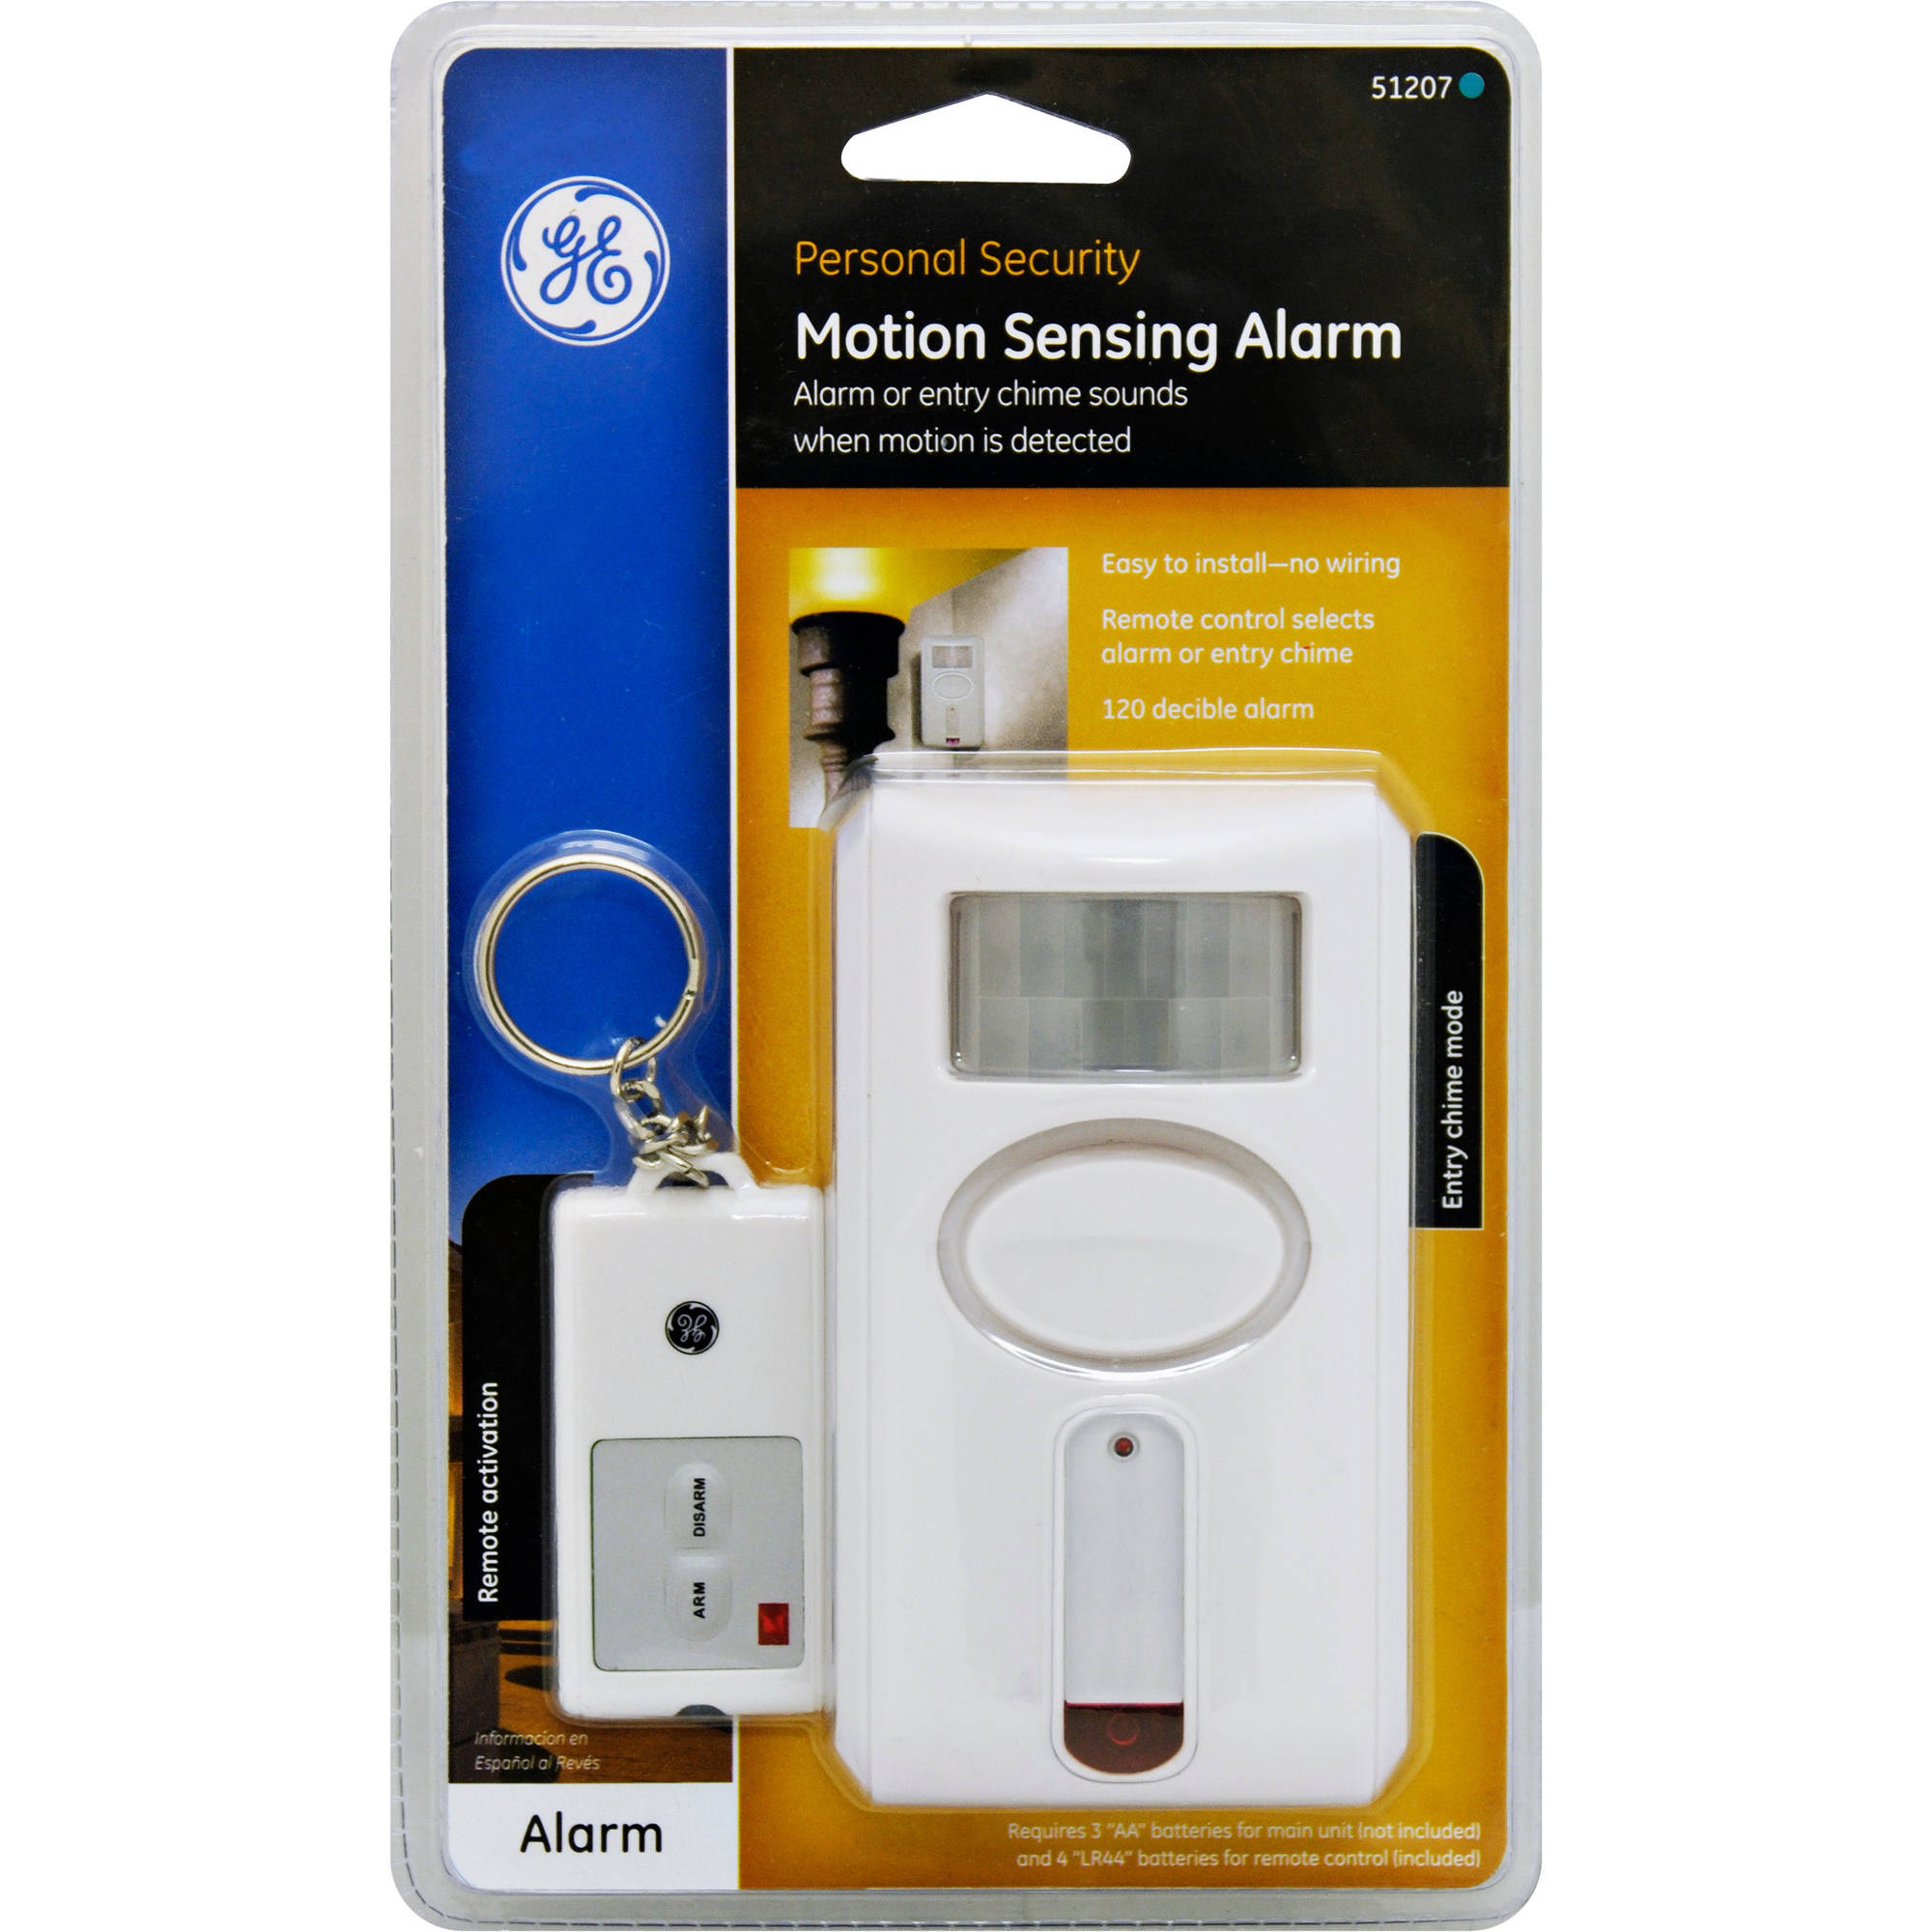 GE Wireless Motion Sensor Alarm With Key Chain Remote 51207 - image 3 of 5